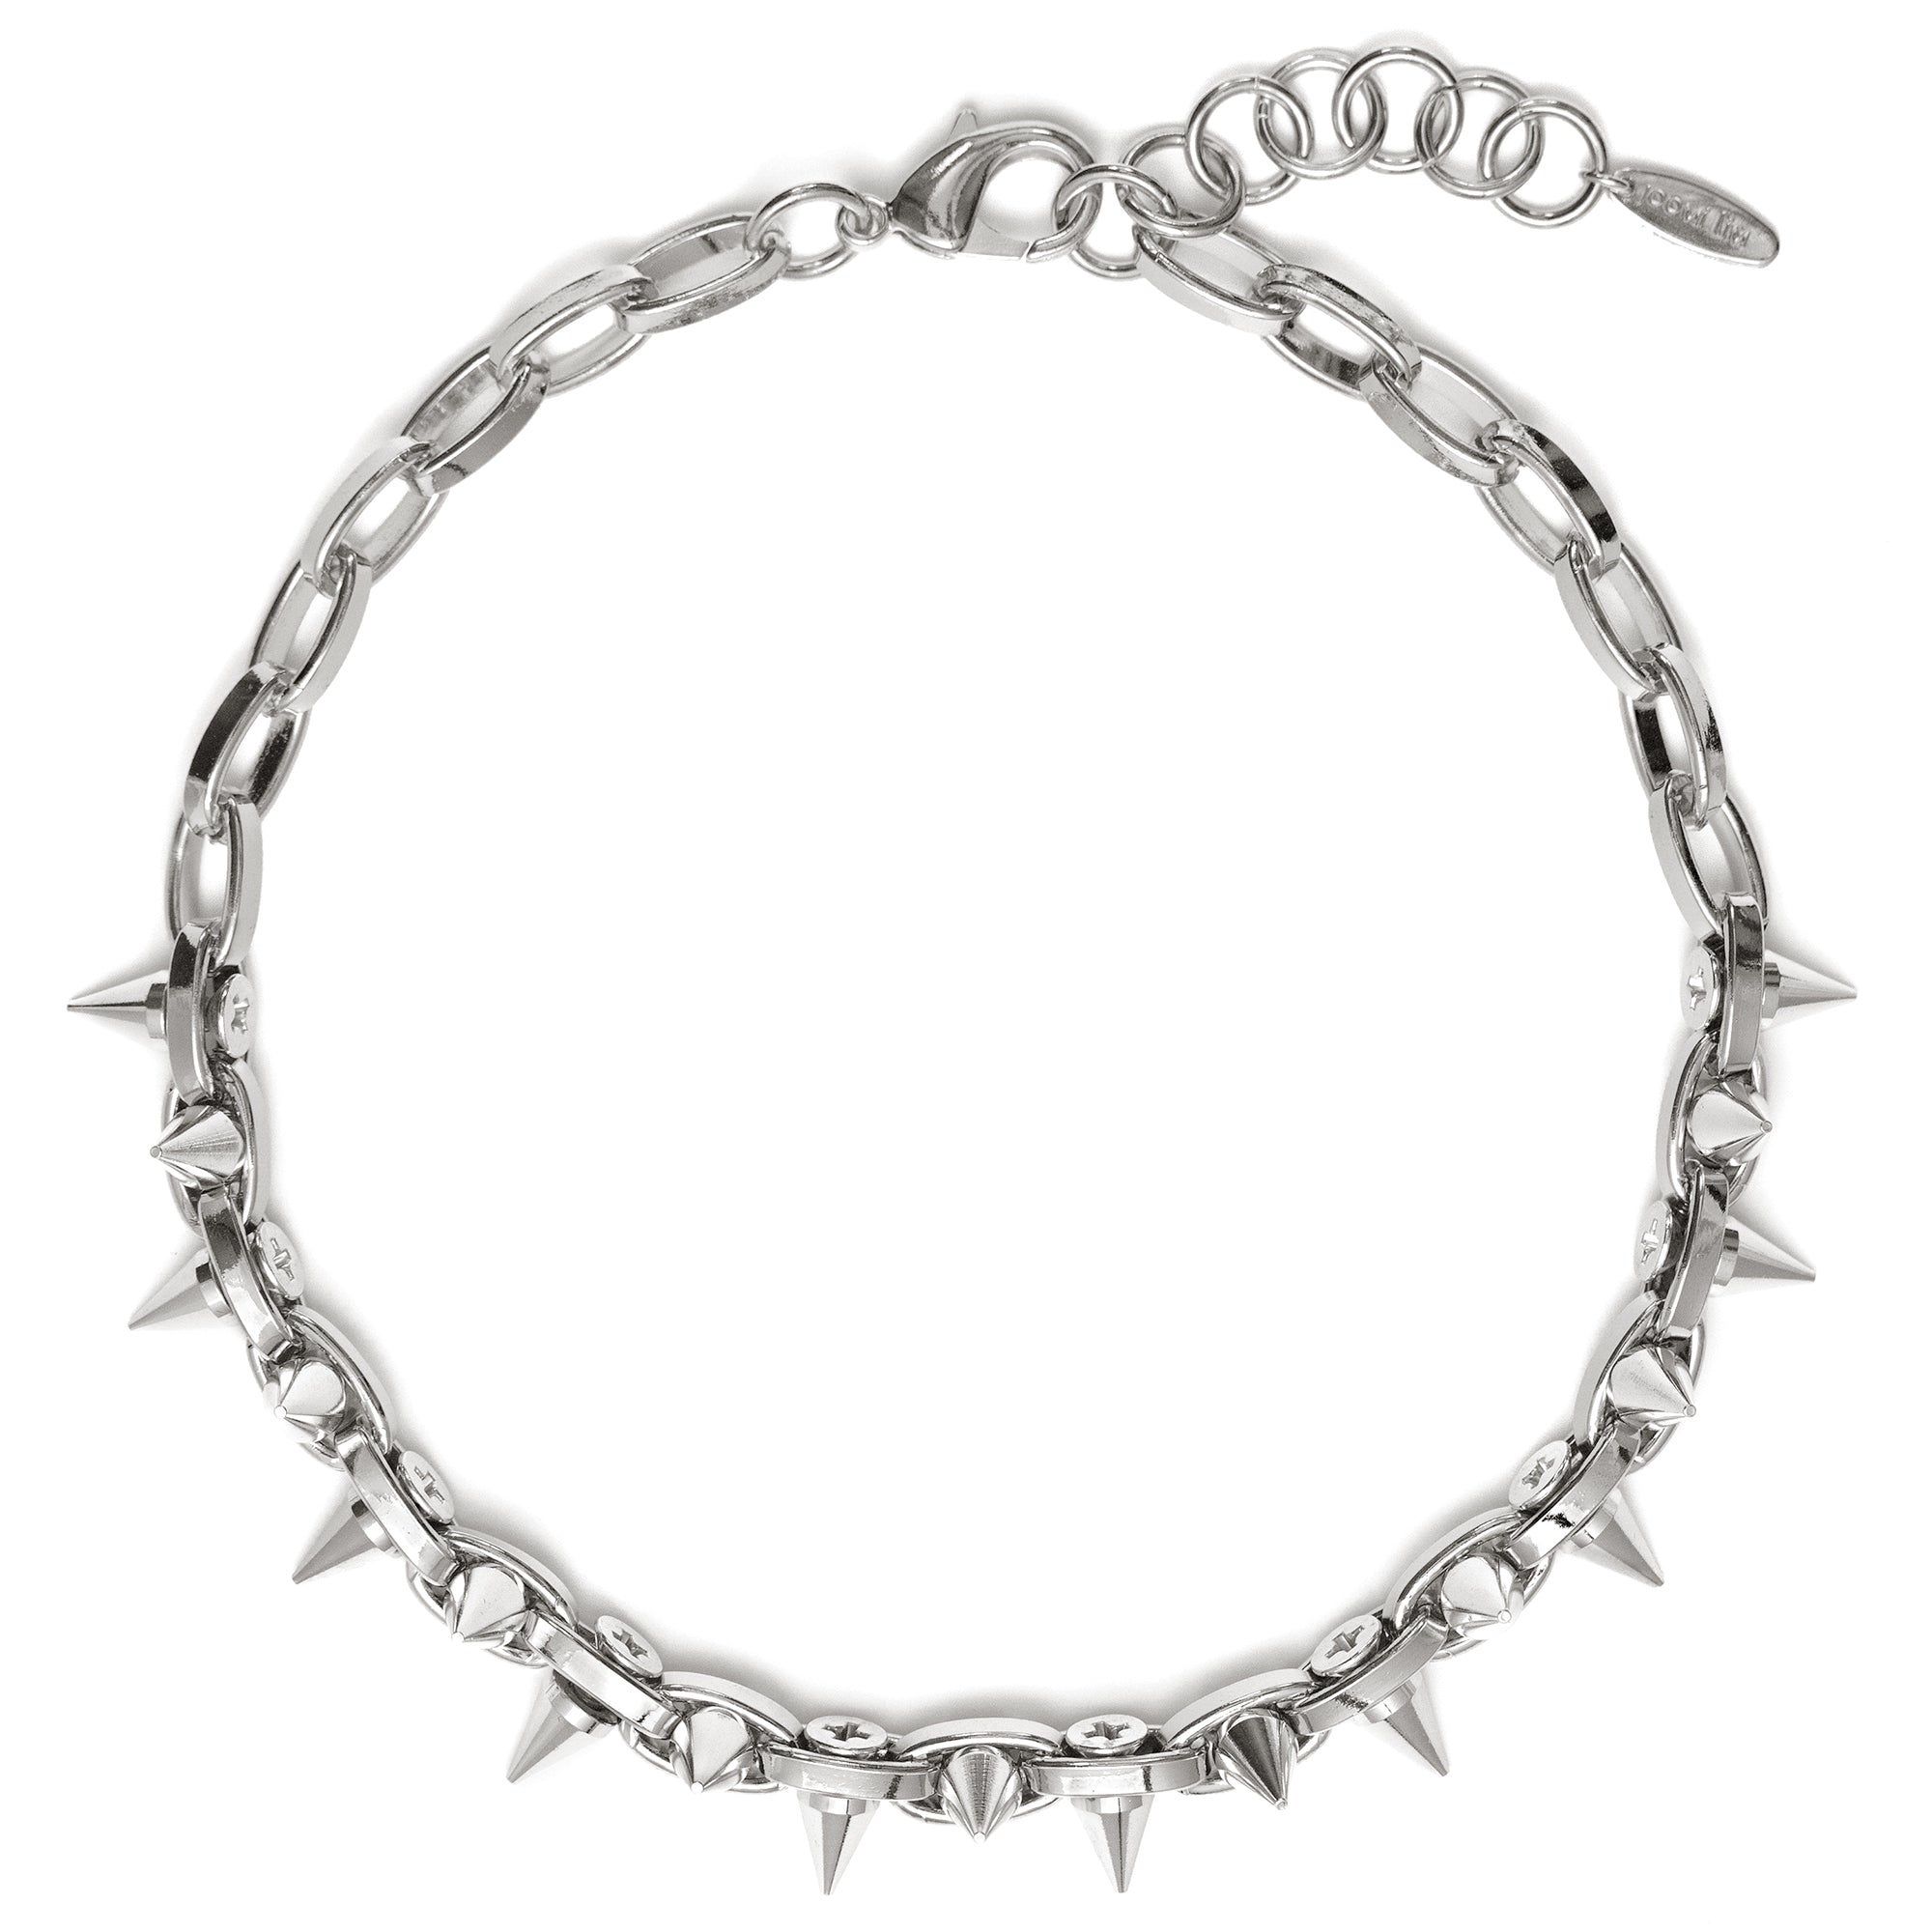 Thorn Necklace